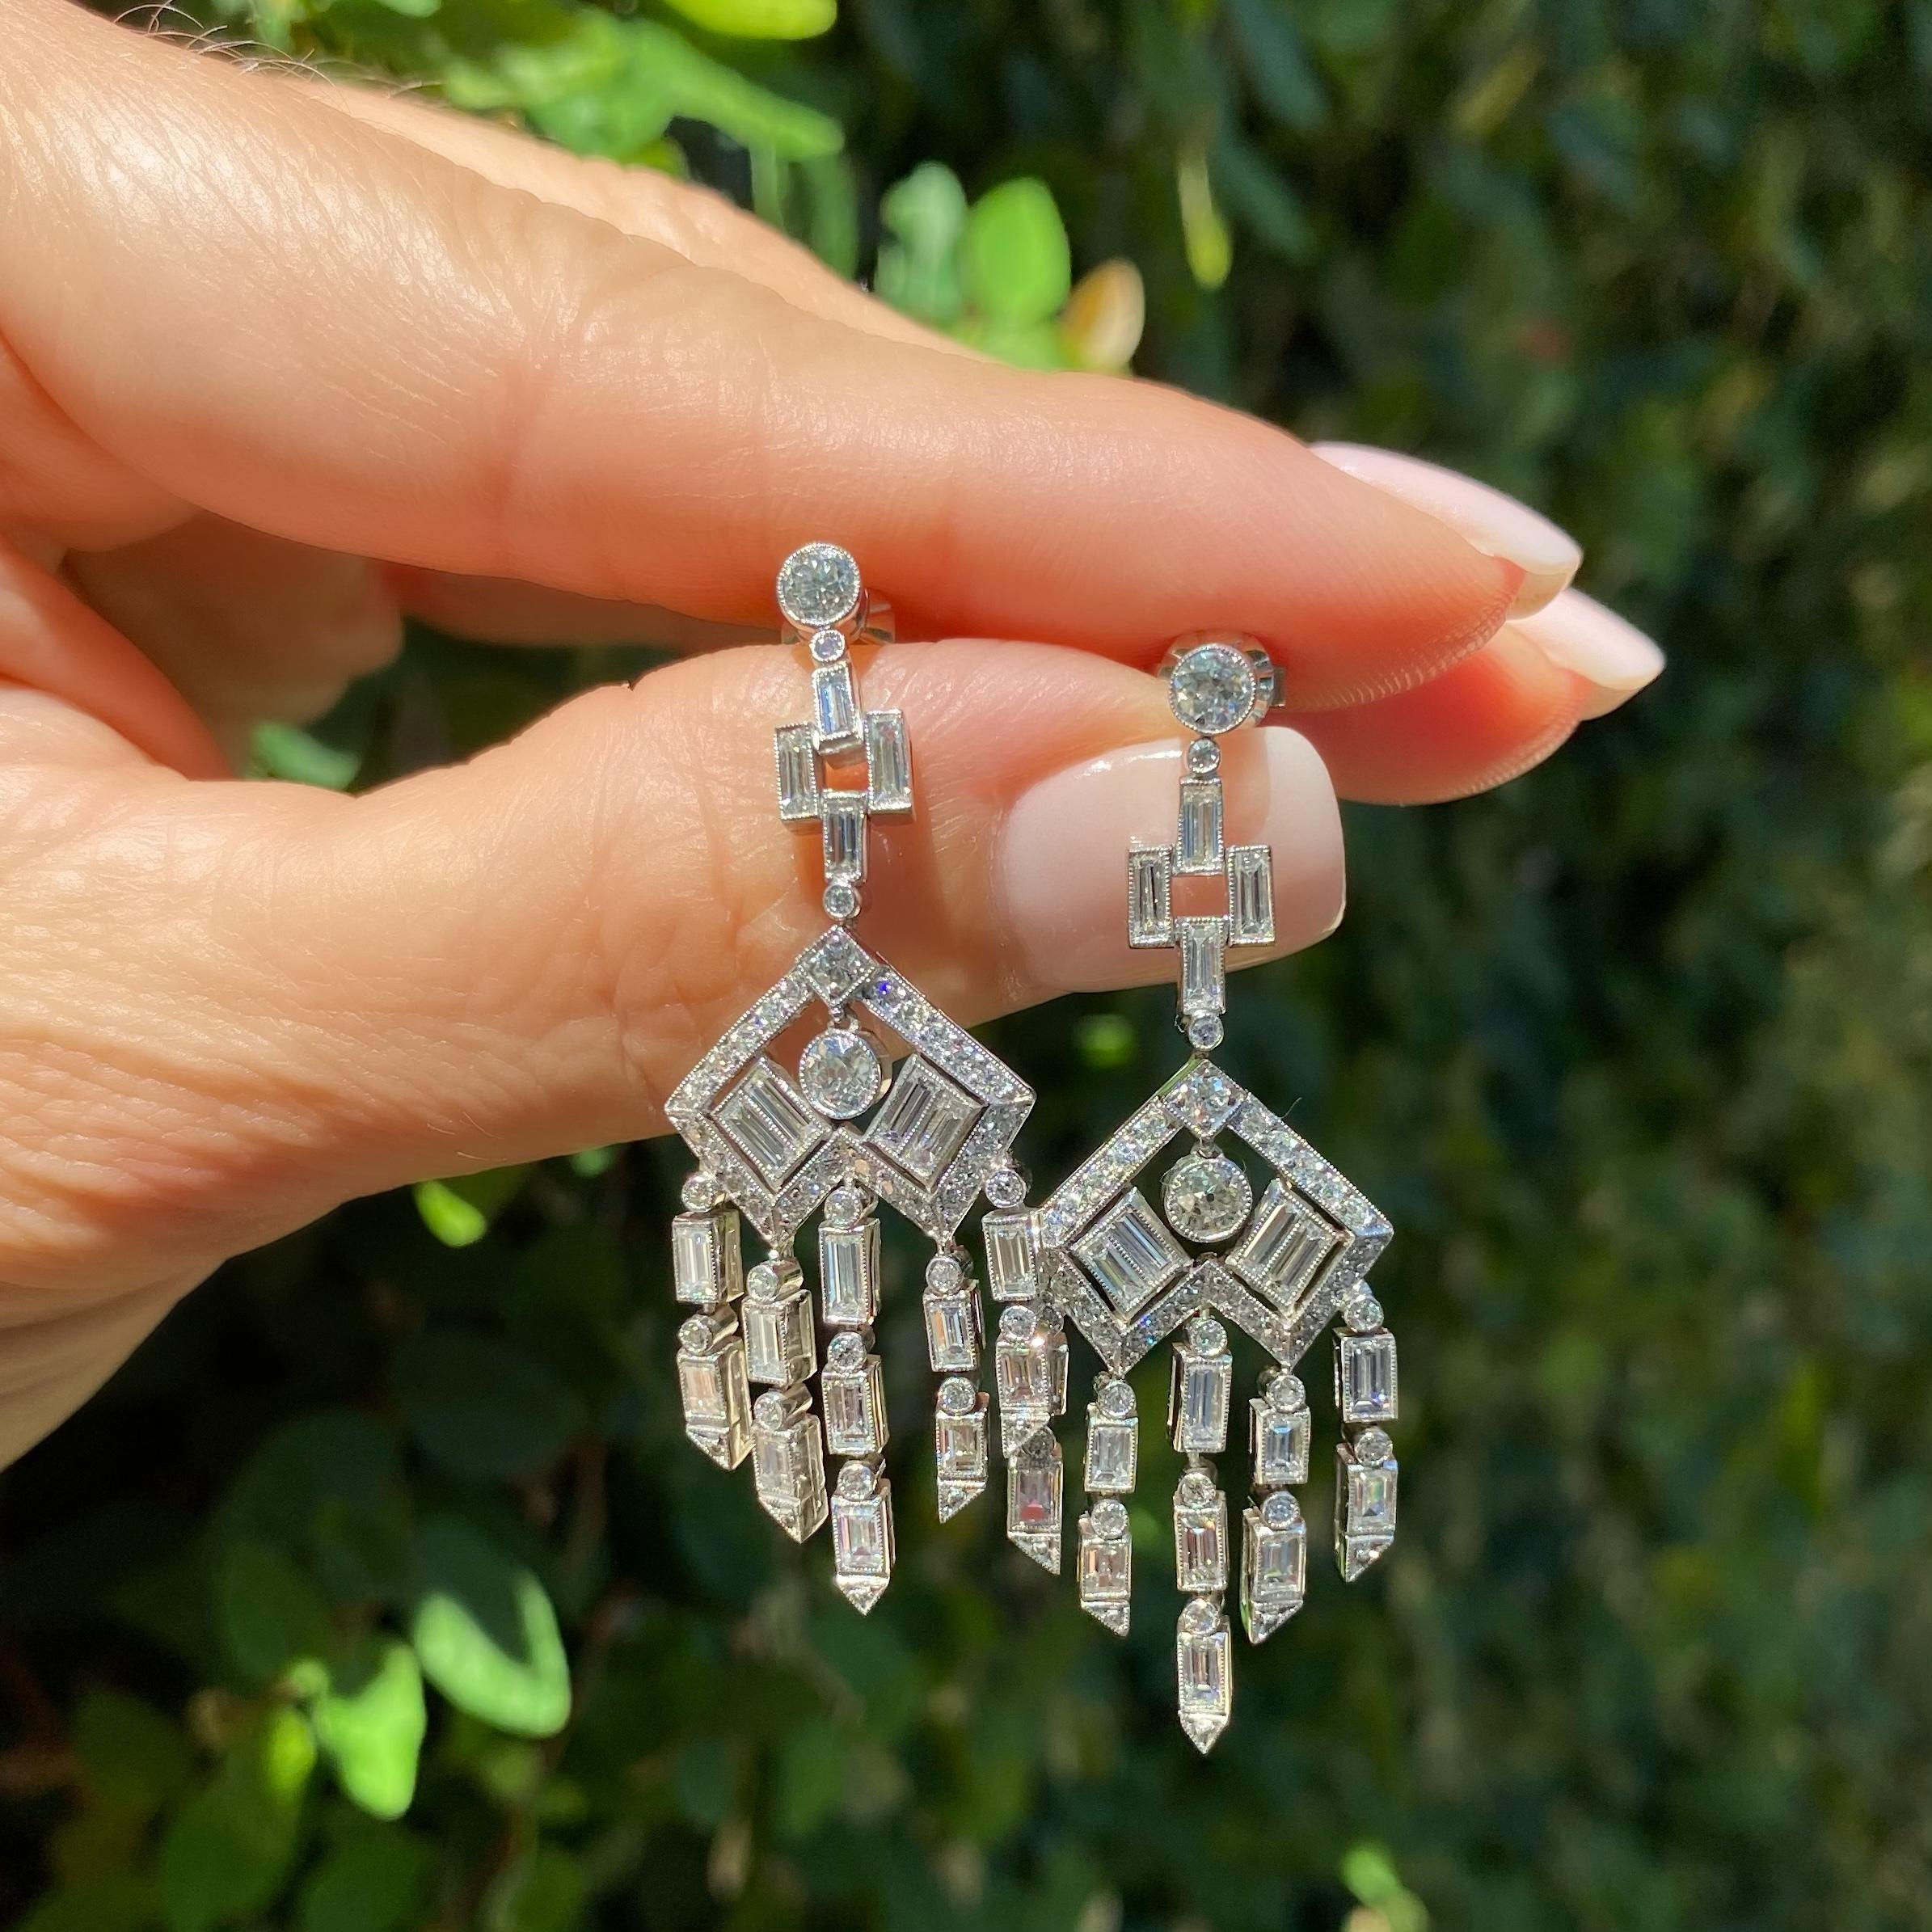 Simply Beautiful!  Chandelier Diamond Drop Earrings. Beautifully Hand crafted in Platinum. Hand set with alternating baguette and round Diamonds; 38 baguette Diamonds approx. 3.05tcw and 30 old European and round Diamonds approx. 1.88tcw. Approx.